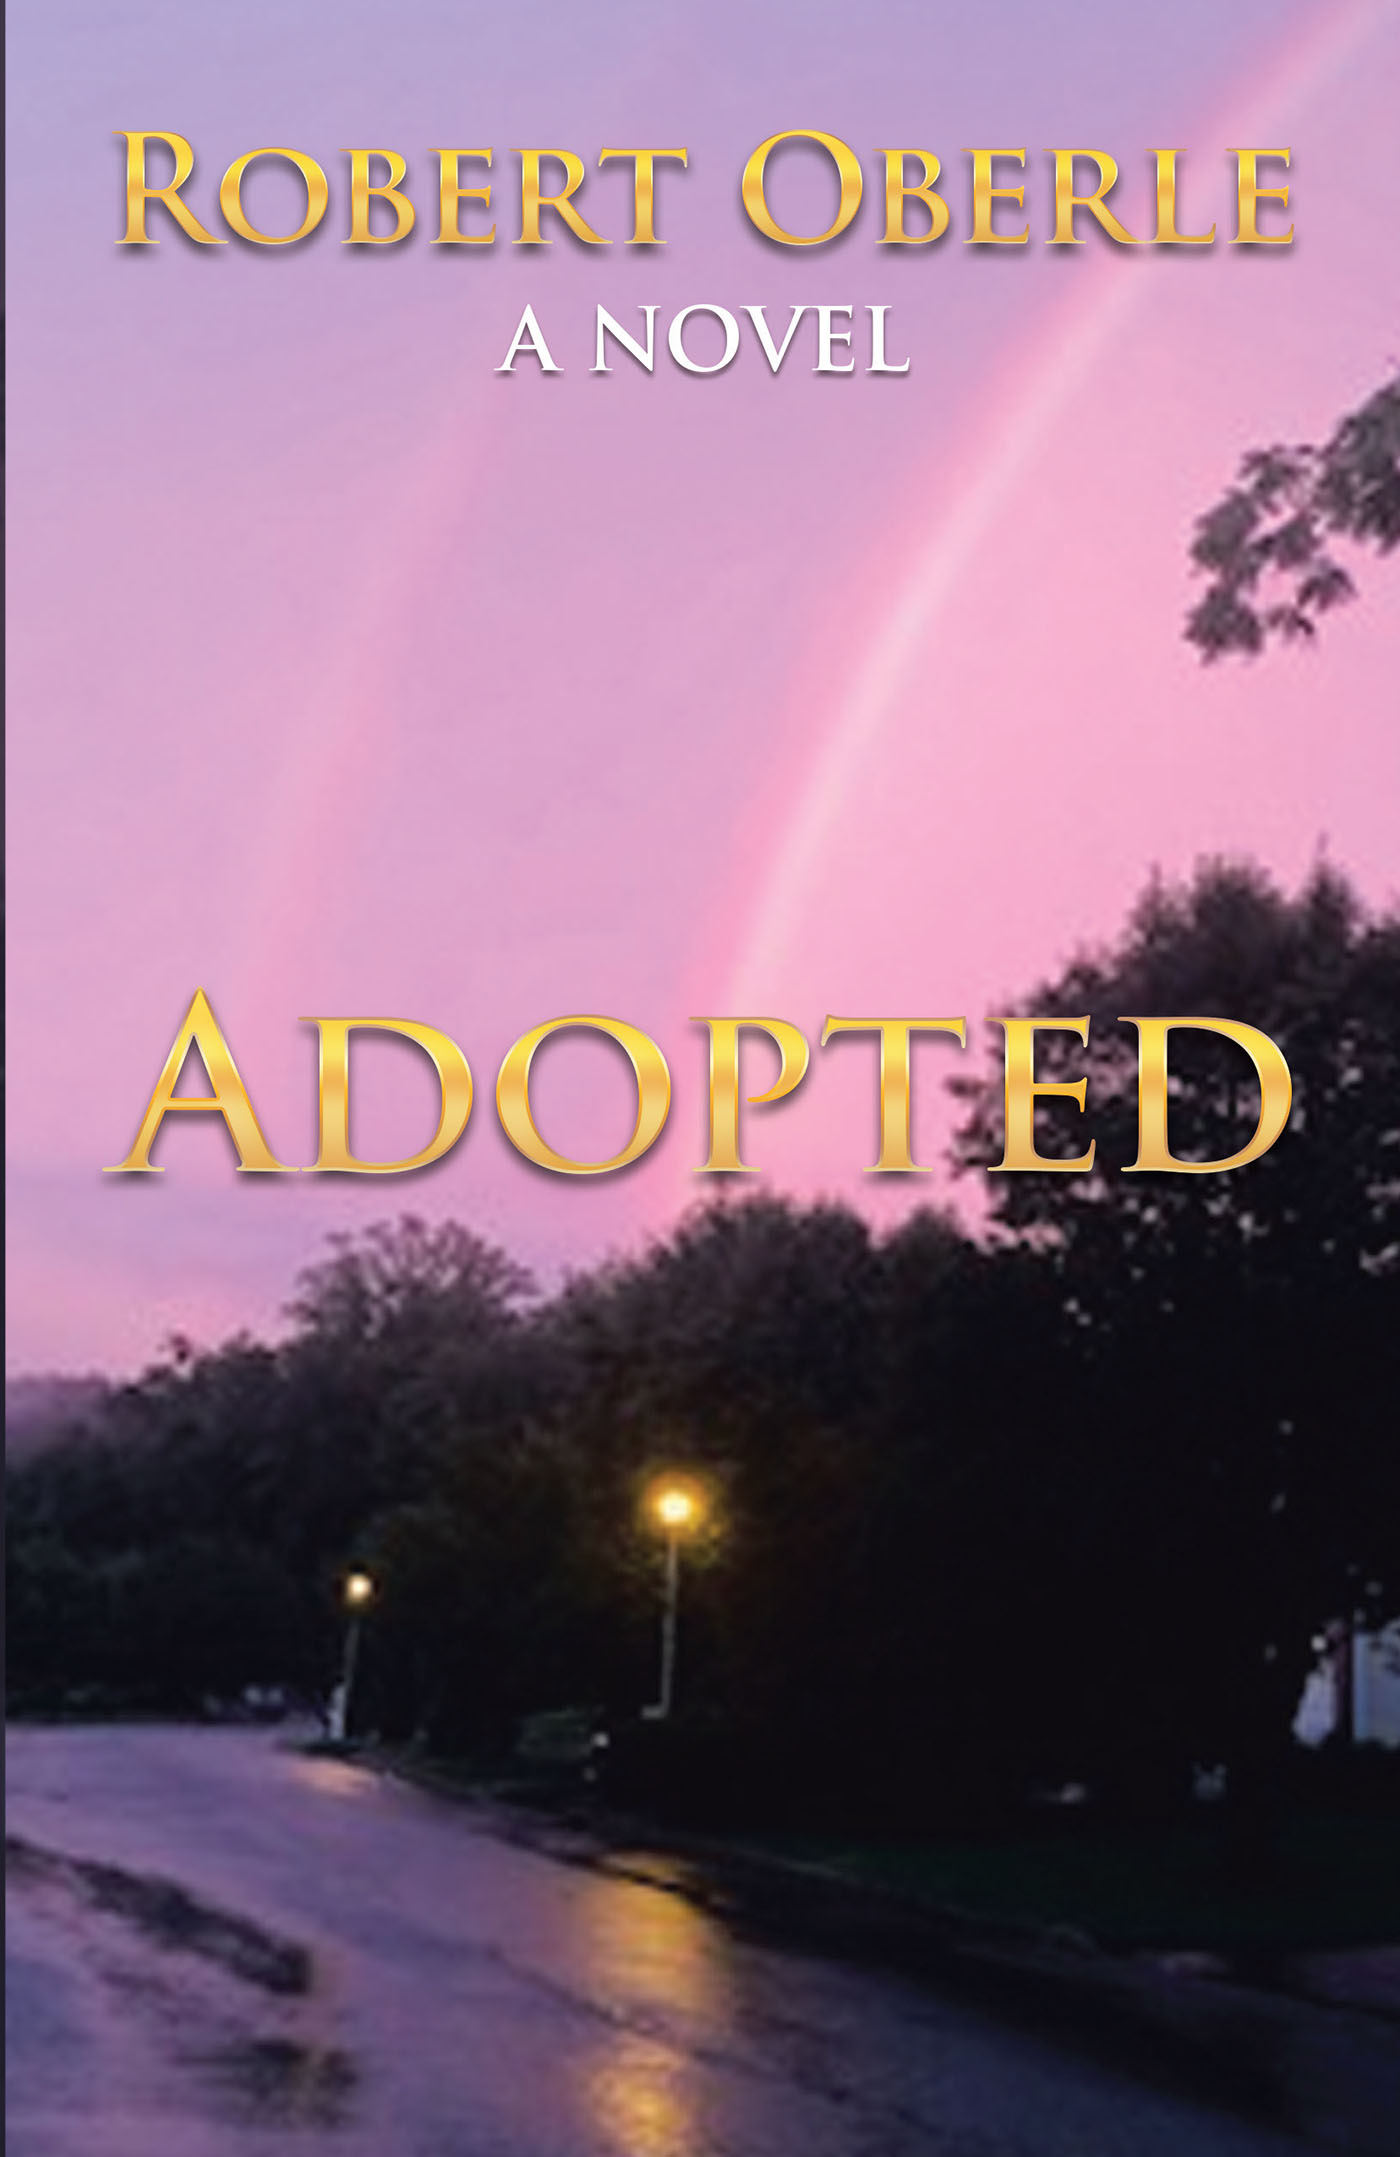 Author Robert Oberle’s New Book, "Adopted," is a Compelling Work Following the Life of Emma Molloy as She Embarks on a Journey of Self-Discovery